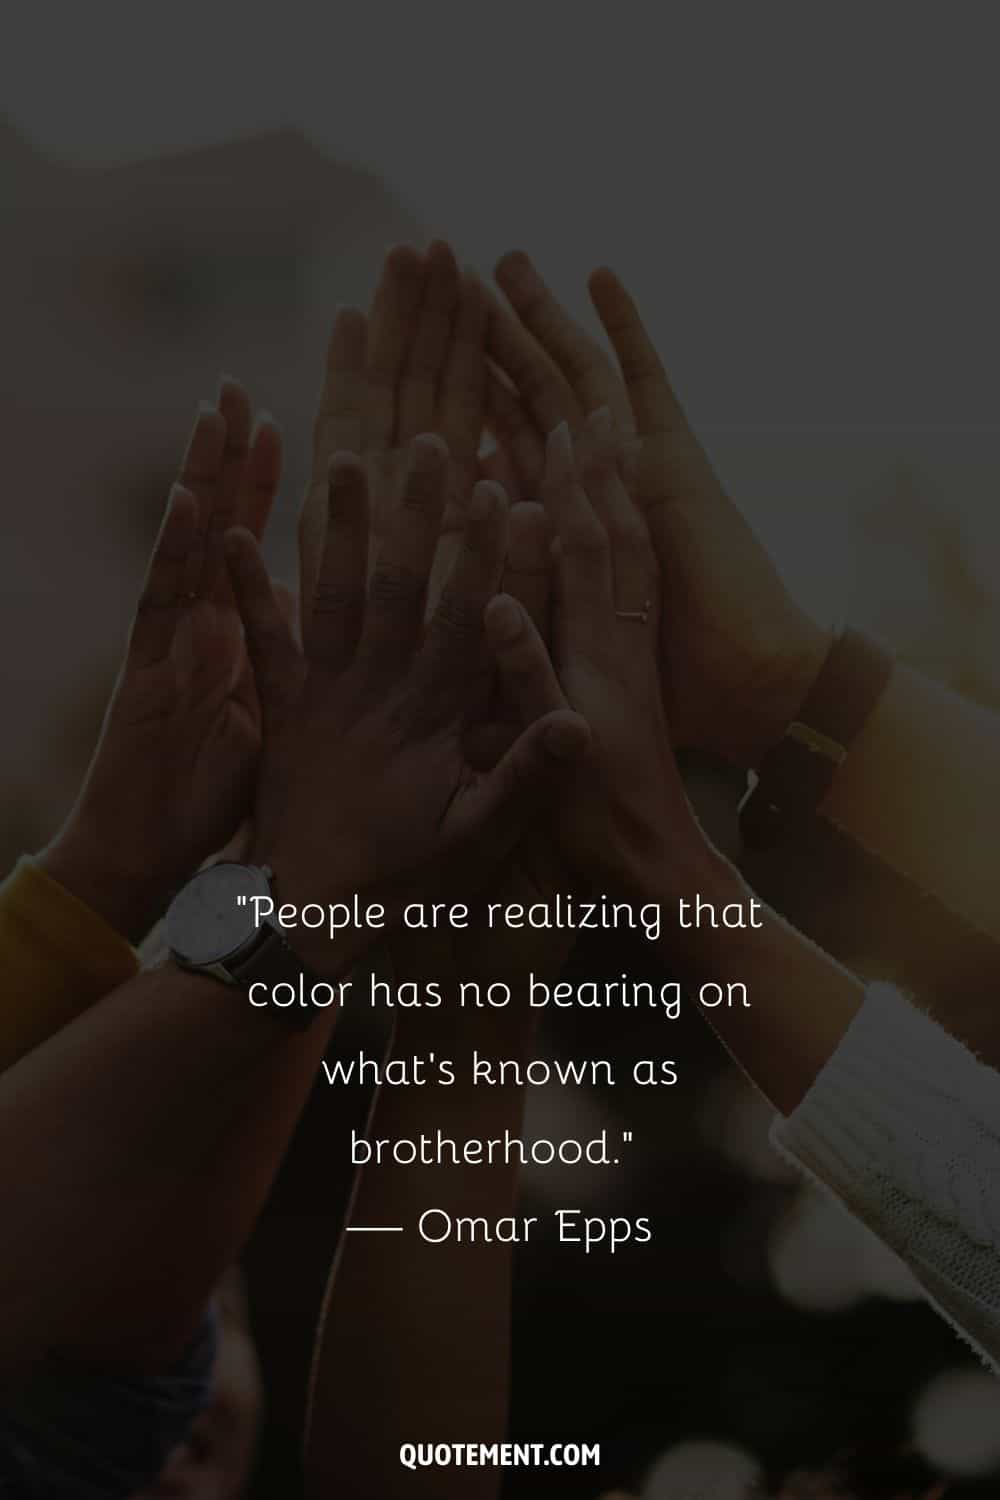 “People are realizing that color has no bearing on what’s known as brotherhood.” — Omar Epps